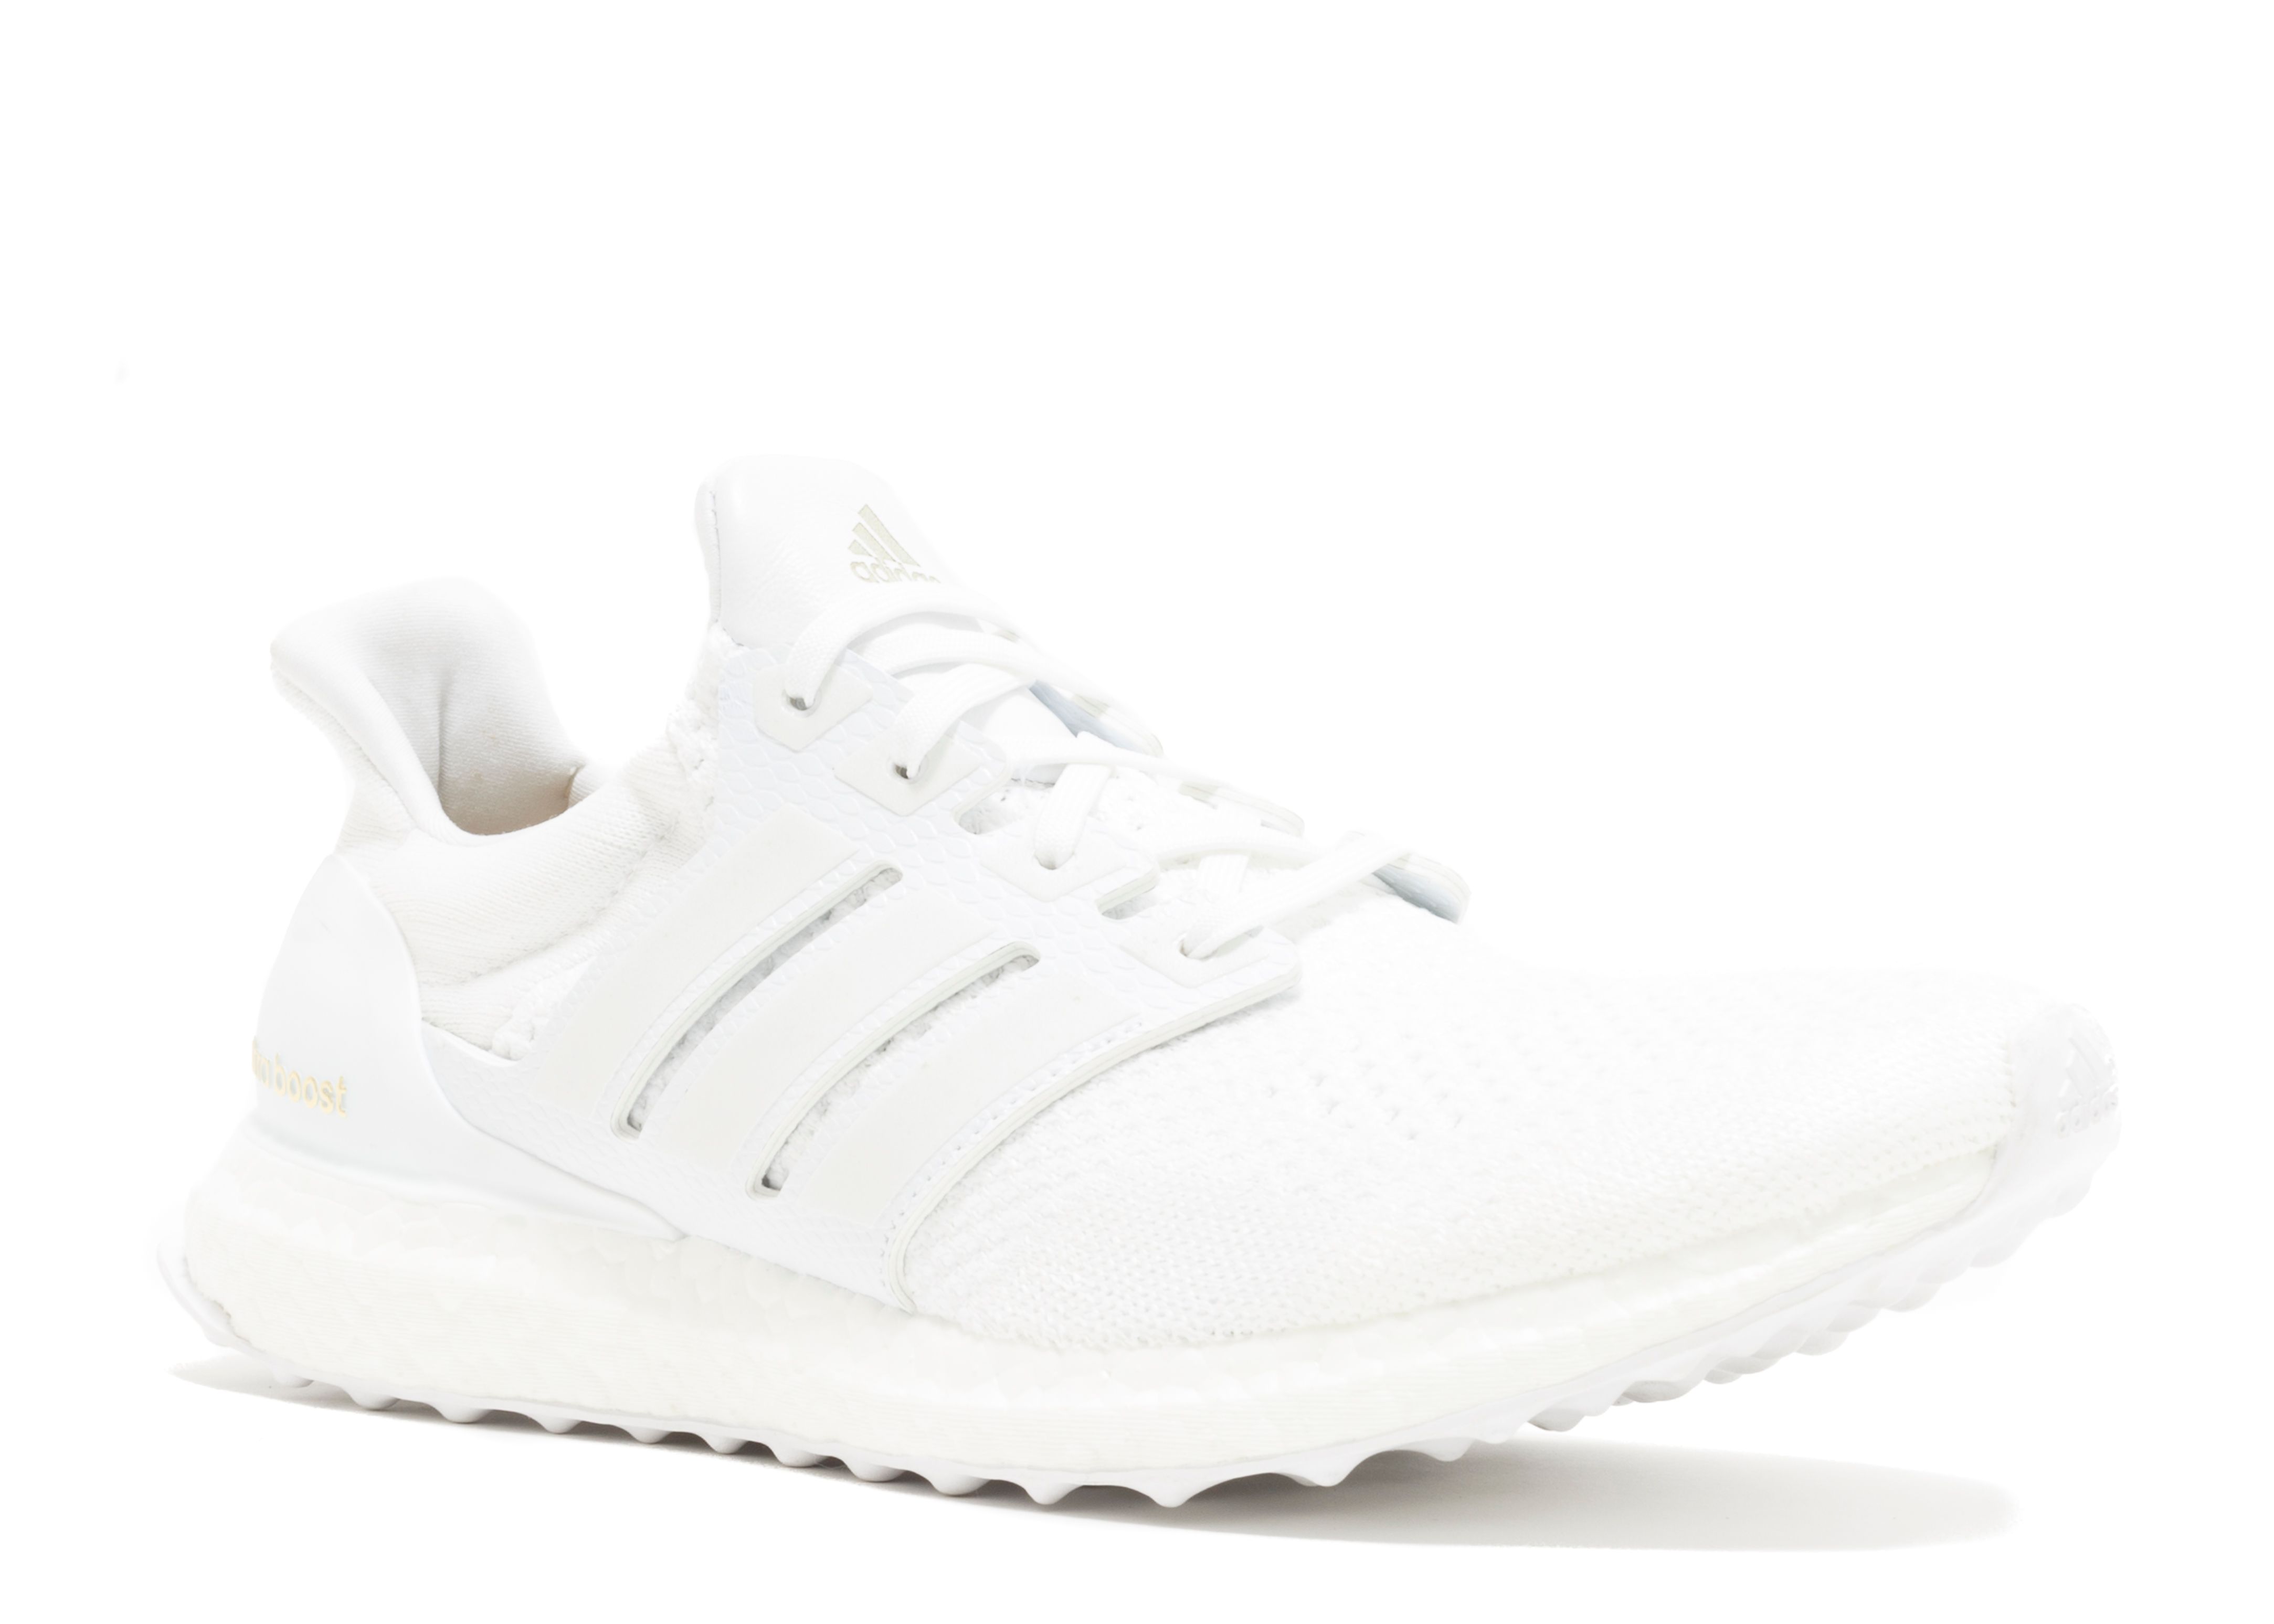 adidas ultra boost j and d white